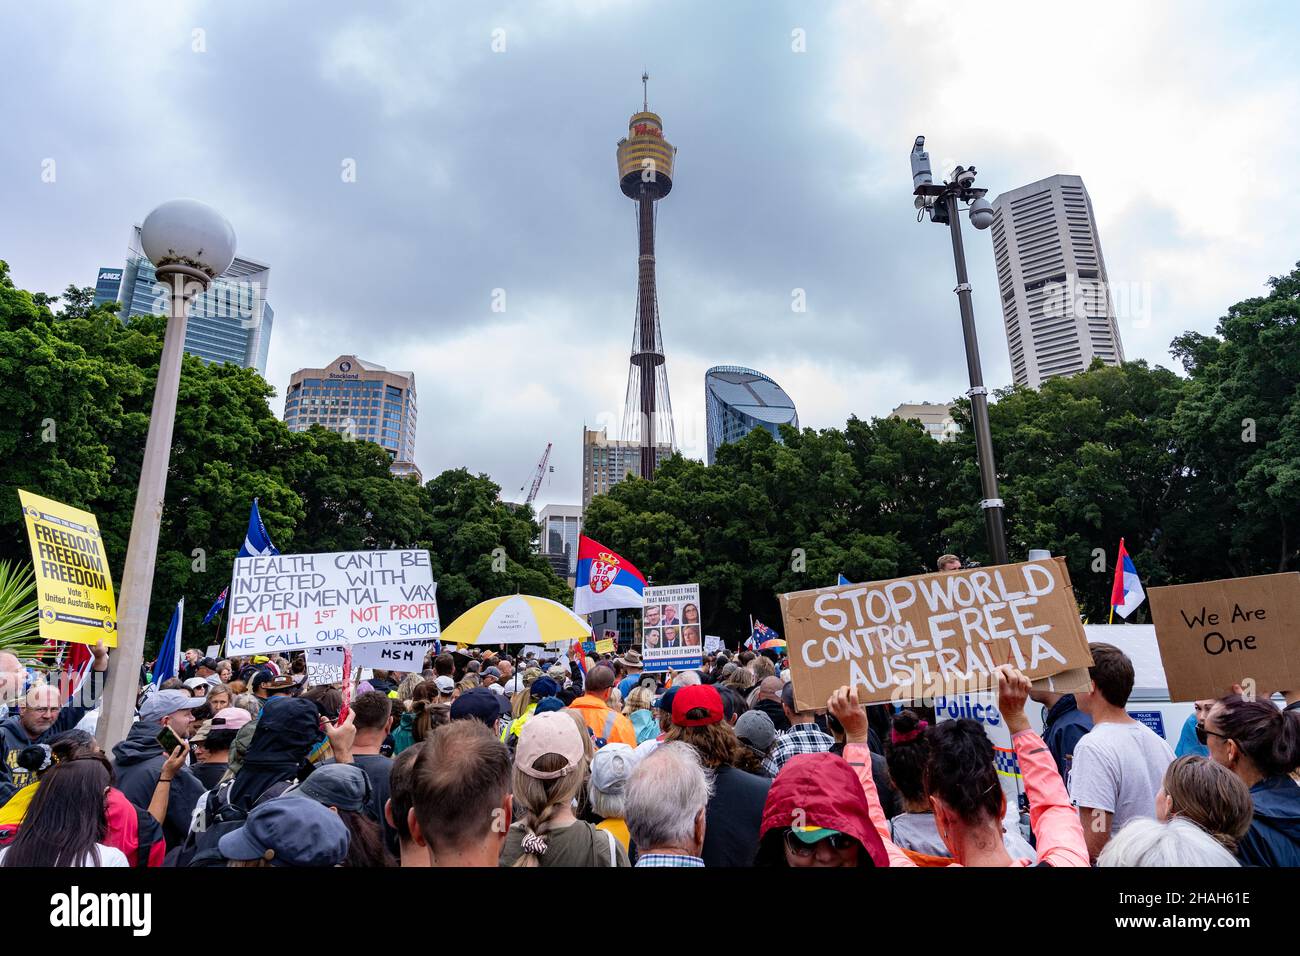 Protest against mandatory covid jabs and restrictions in Australia. Thousands of people near Sydney Eye Tower on 27 November 2021 Stock Photo